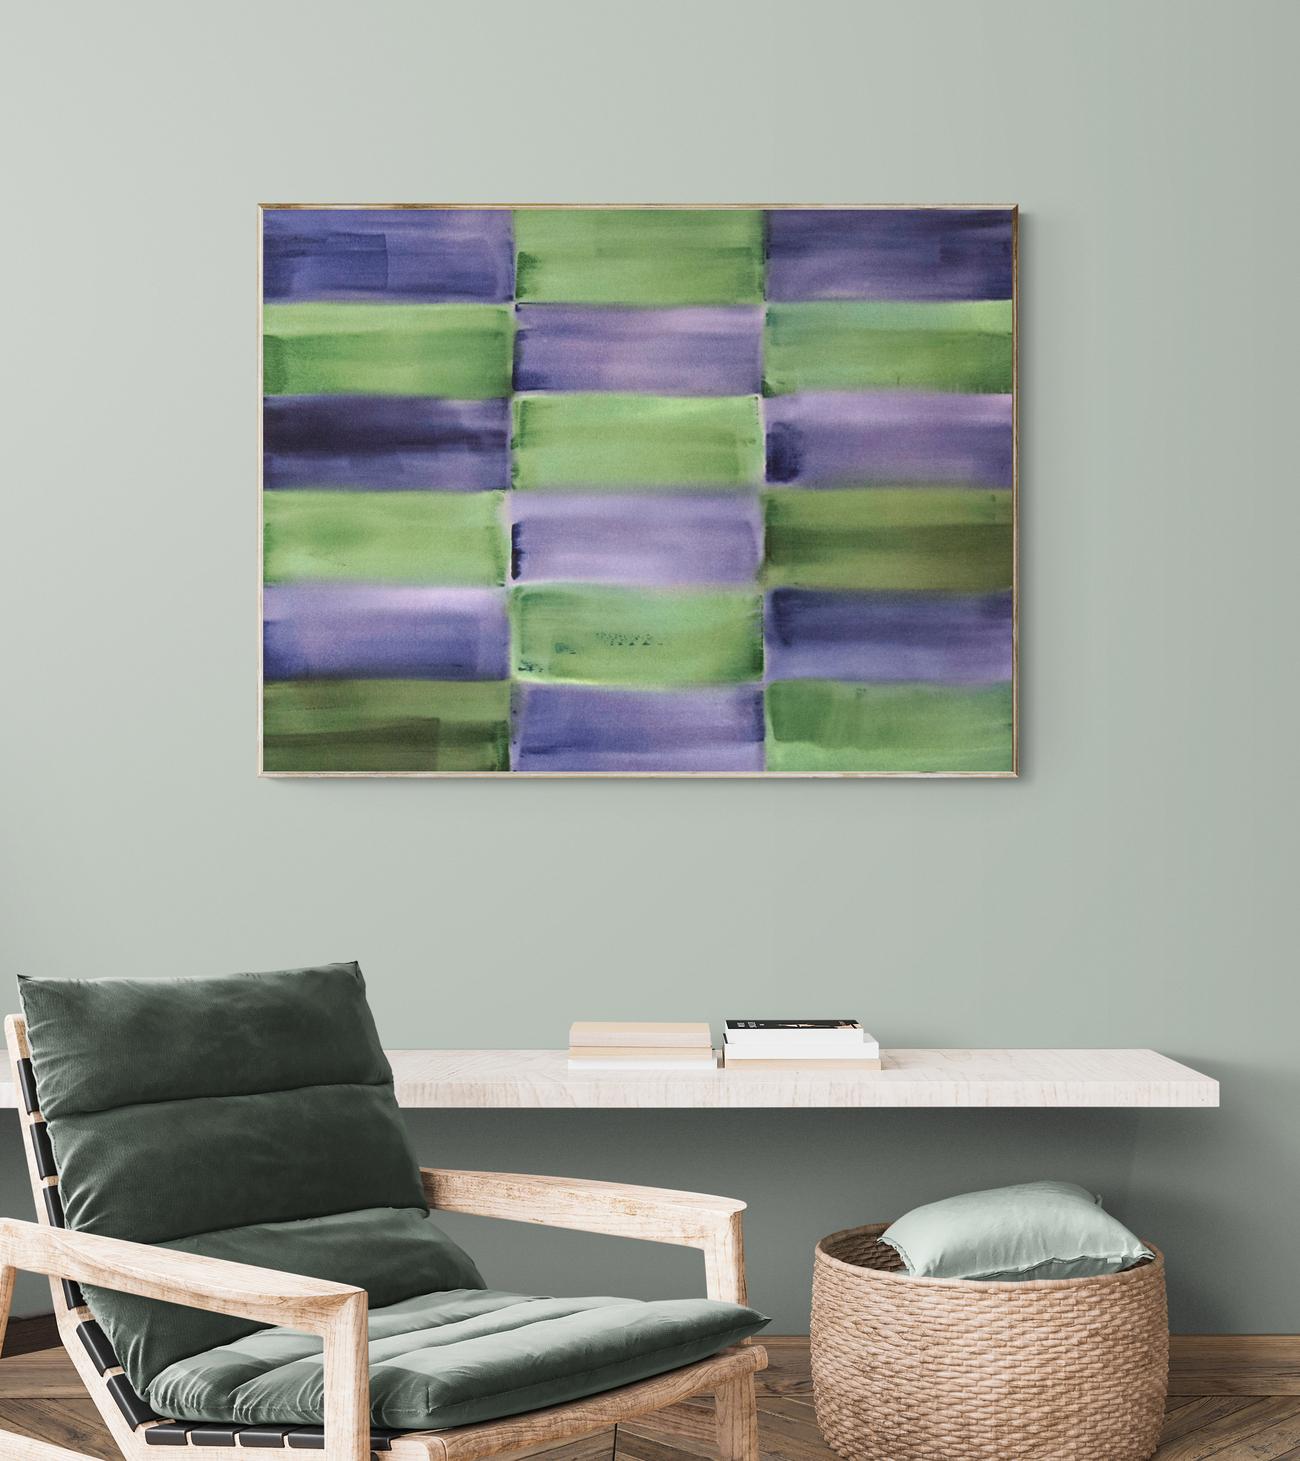 Winter Solstice - purple and green grid, geometric abstract, acrylic on canvas - Gray Abstract Painting by Milly Ristvedt